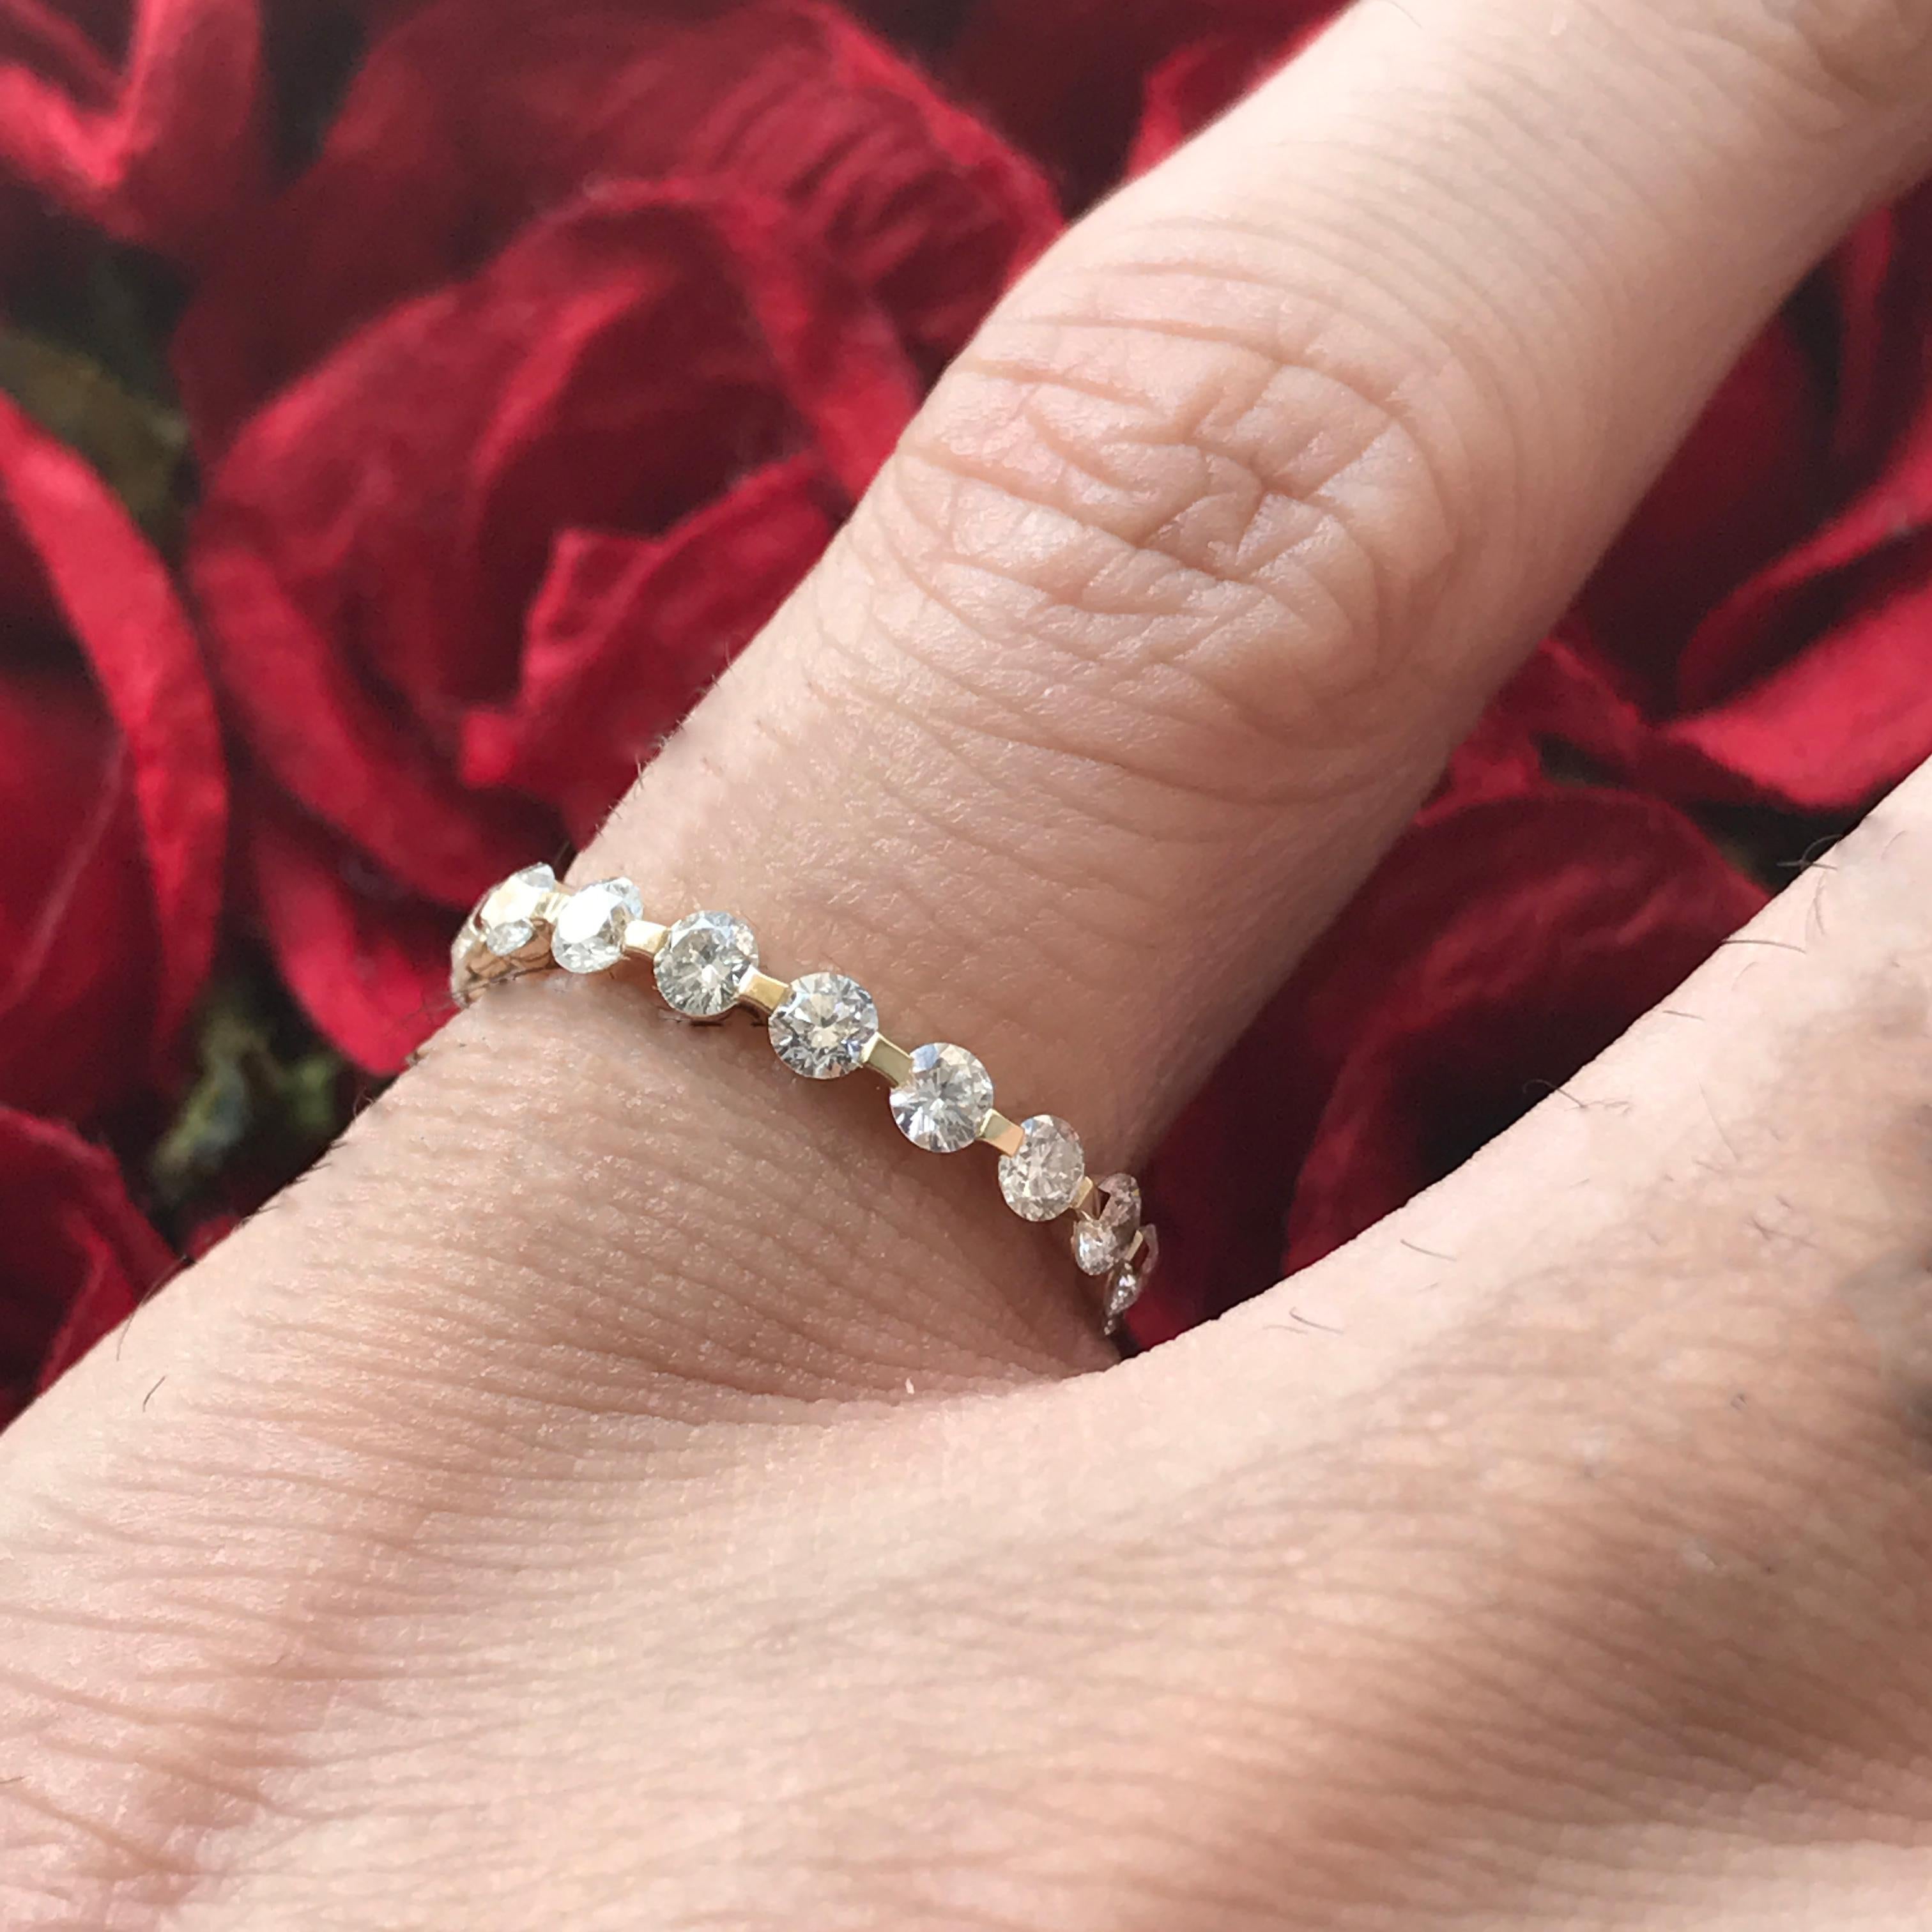 Made to order, please allow 2-5 weeks.
 
Round Set Diamond Wedding / Eternity Band 1.26 CTW F-H Color VS - SI Clarity

18 Perfectly Set Diamonds 2.5mm each
White natural diamonds no treatment (F-H Color VS-SI Clarity)
Solid 14k Yellow Gold

Can be